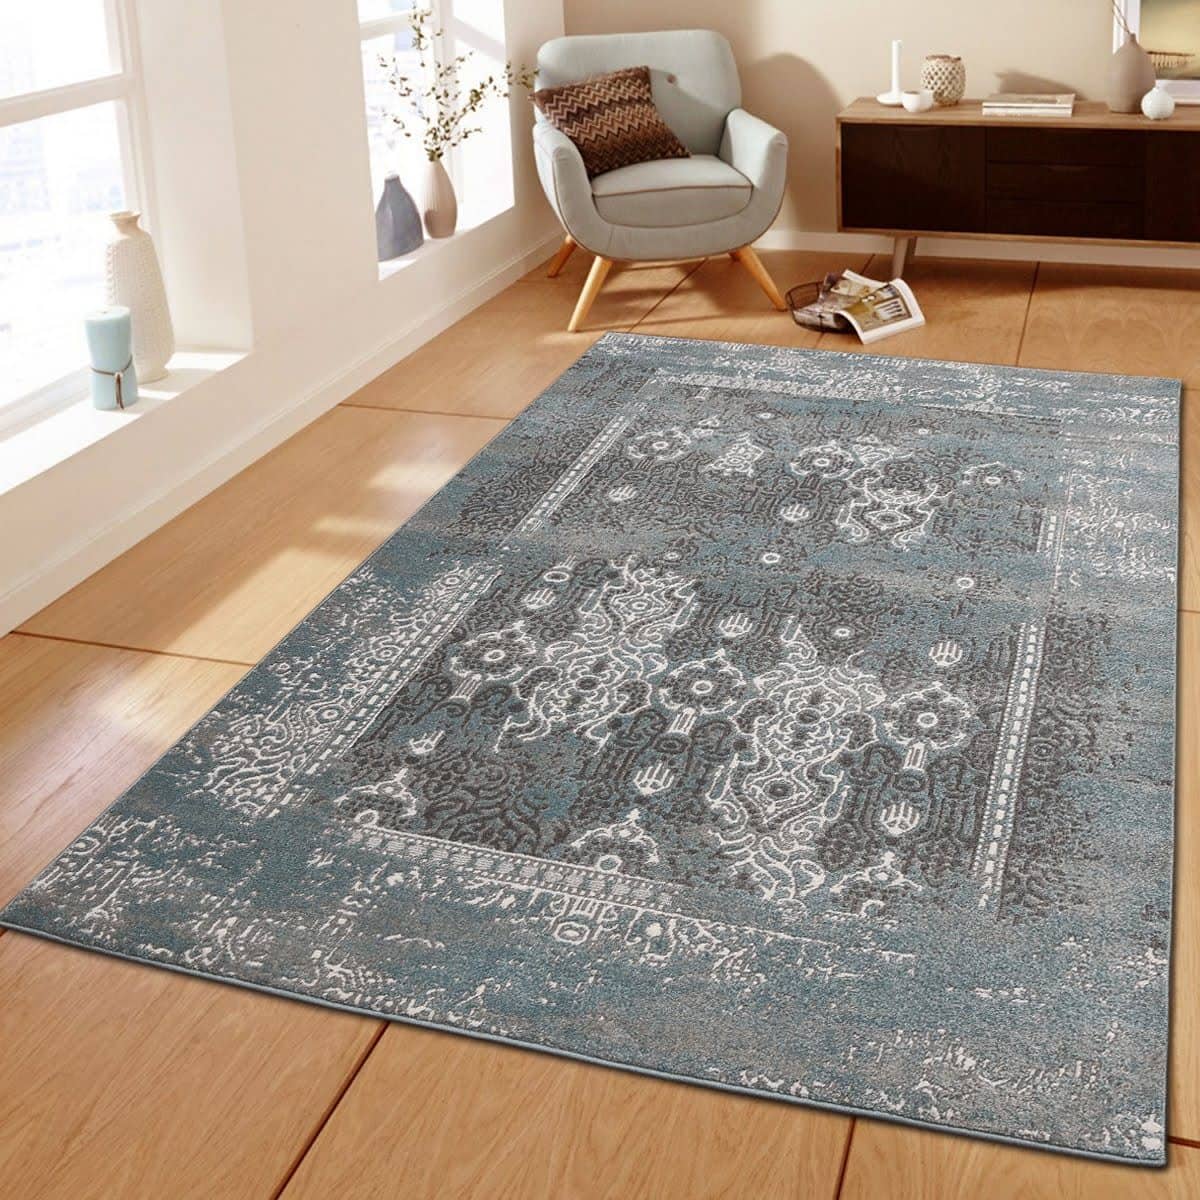 Contemporary Transitional Area Rug Zara 200 - Context USA - Area Rug by MSRUGS